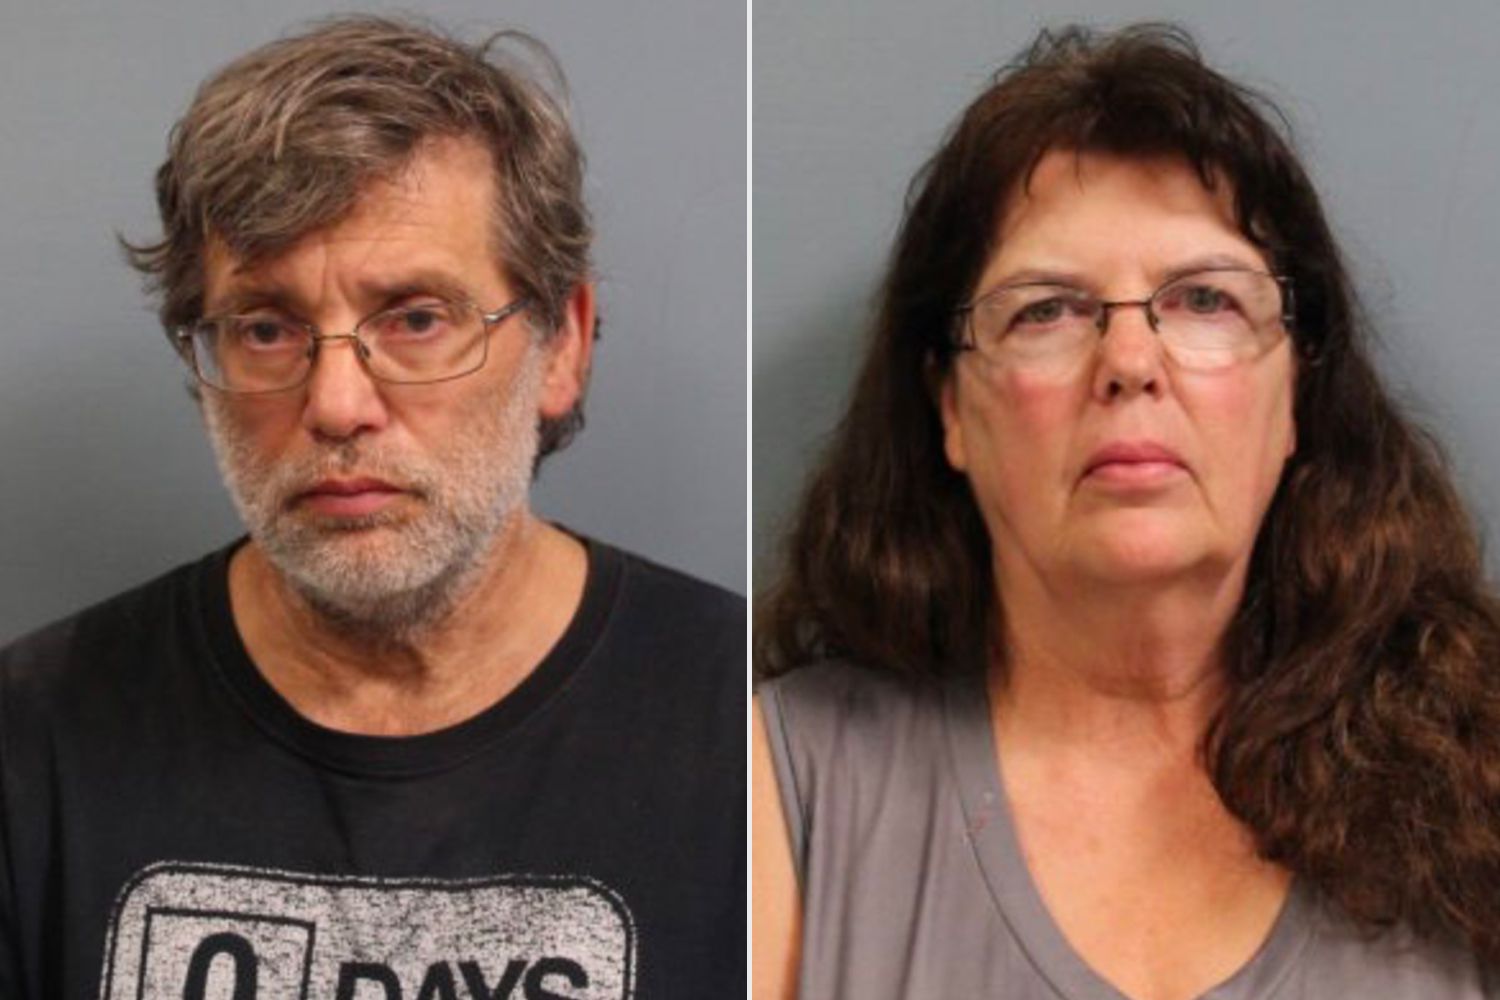 West Virginia Couple Charged with Using Adopted Children for Forced Labor